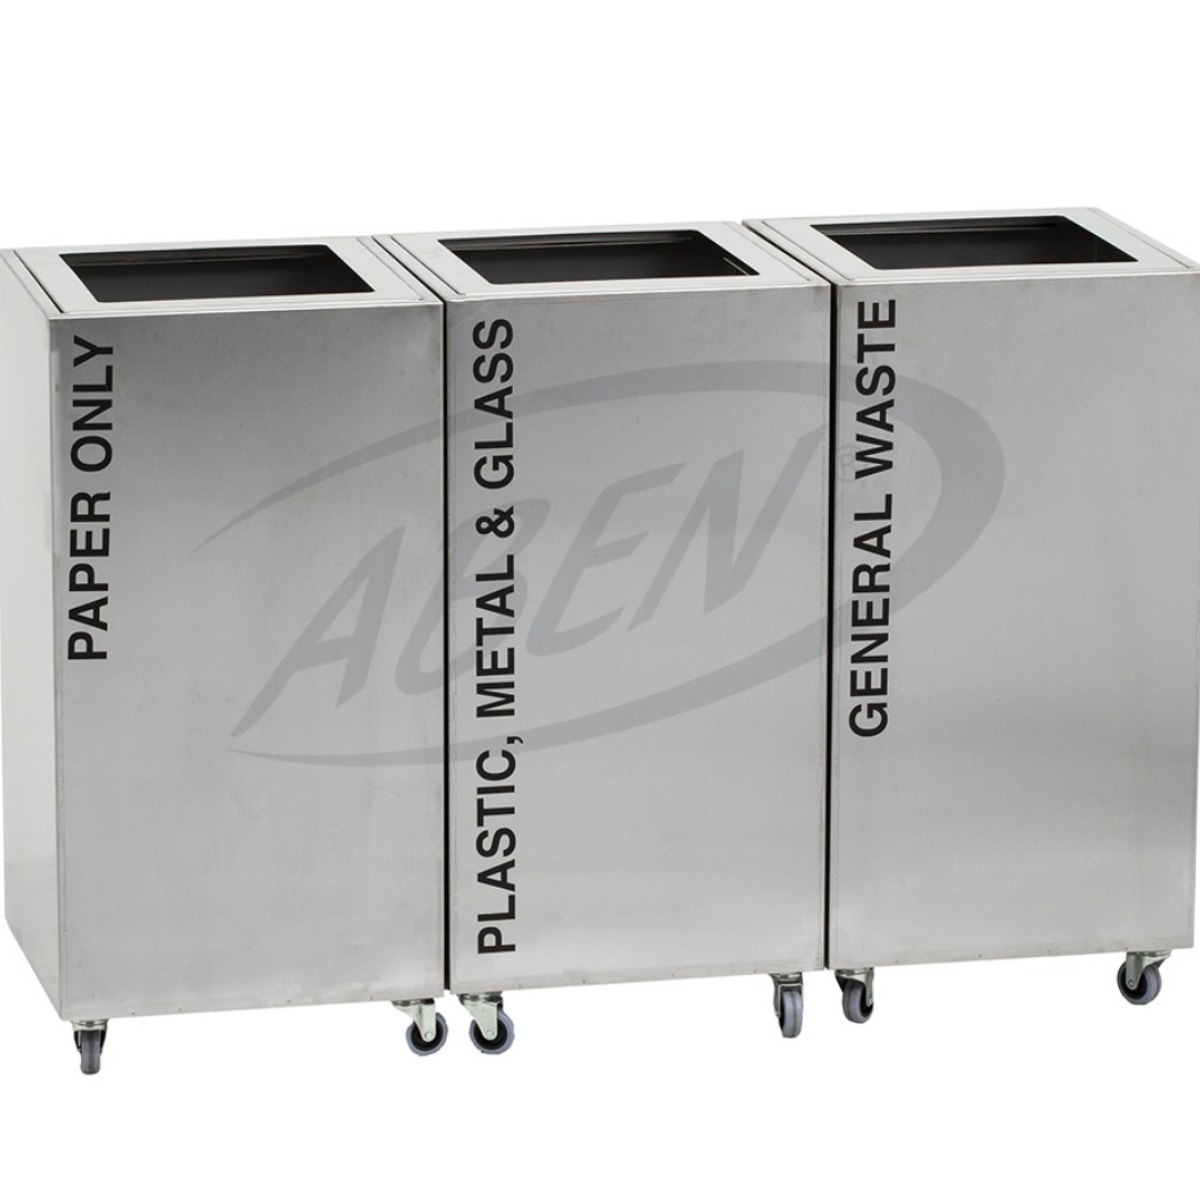 AB-796 3'Part Recycle Bin product logo